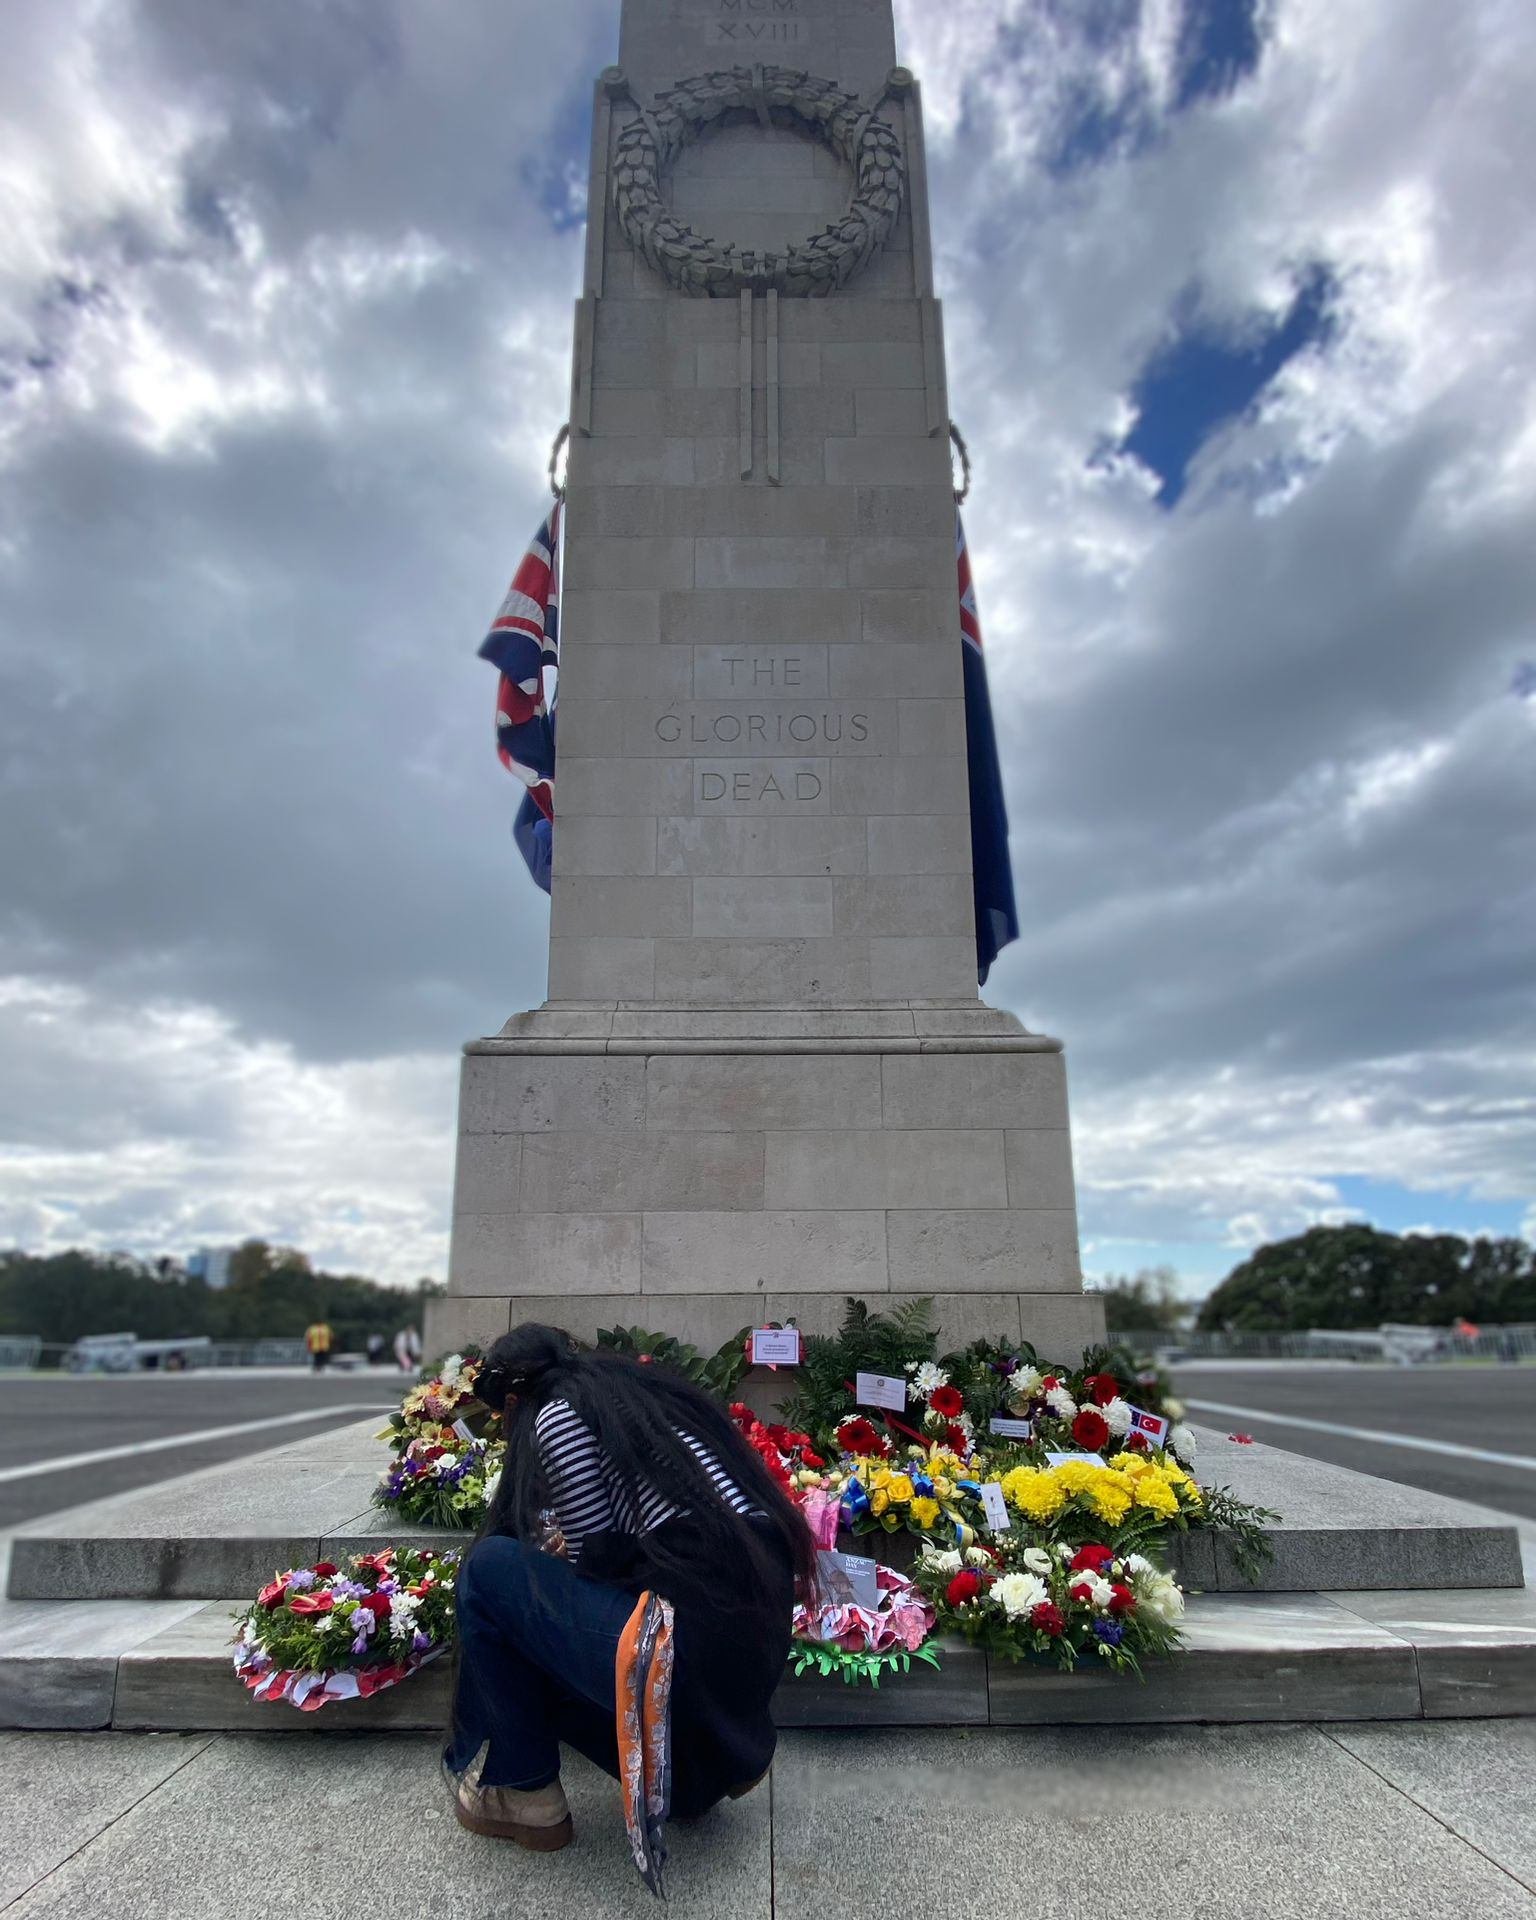 Thousands of Kiwi's and Australians are making their way to services across both countries and around the world, as dawn on Anzac Day approaches. 

Held to commemorate the dawn landings on the Gallipoli Peninsula in T&uuml;rkiye in 1915, since its in